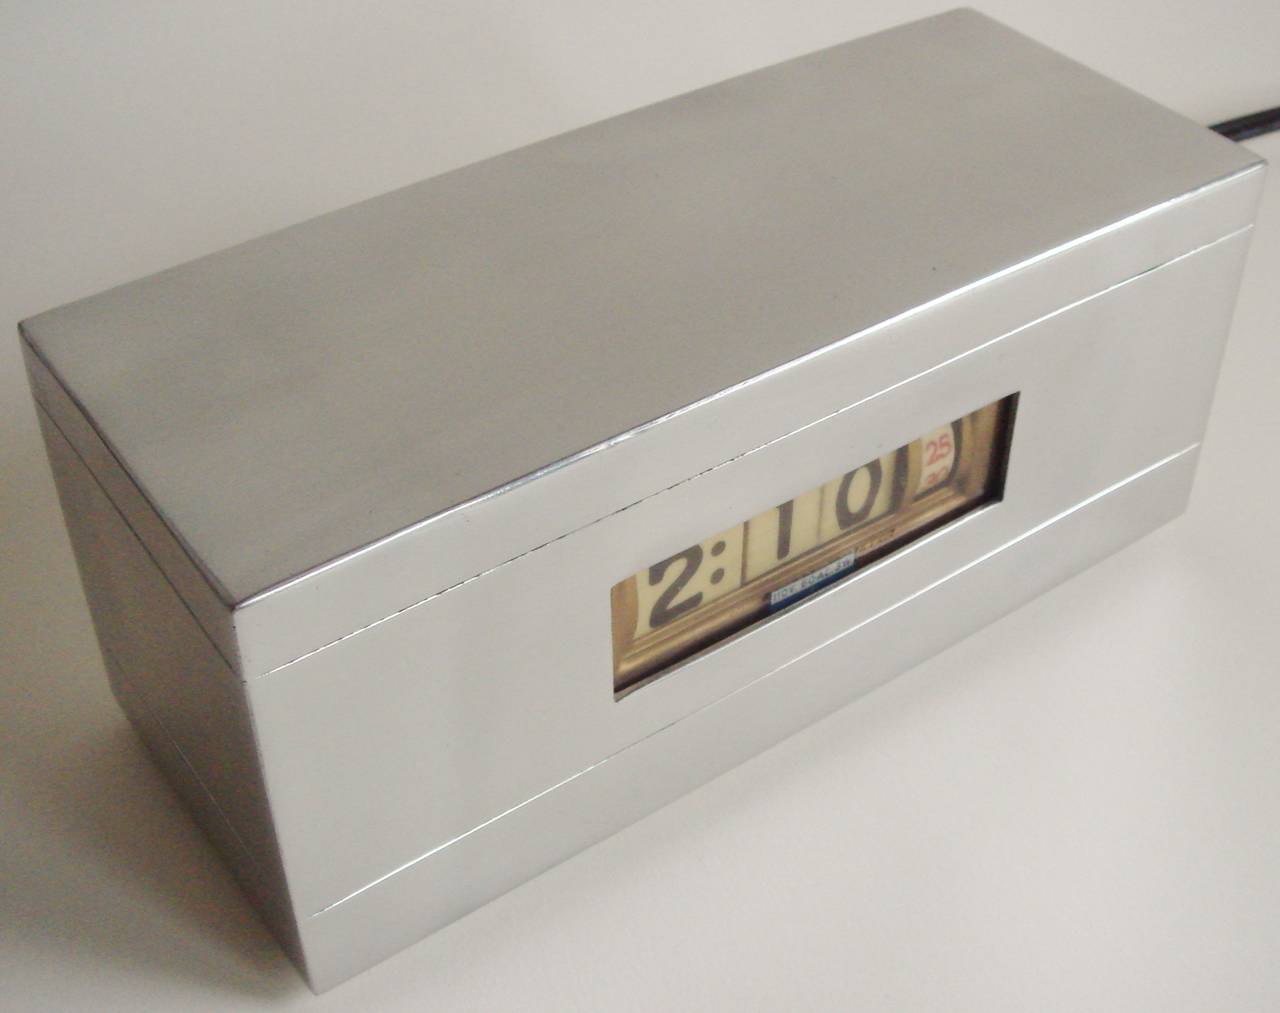 This American Art Deco/Machine Age buffed aluminium moon crest digital clock is the work of the Smith Metal Arts Company of Buffalo, NY. This company introduced a range of stylish Streamlined desk accessories including these digital clocks all